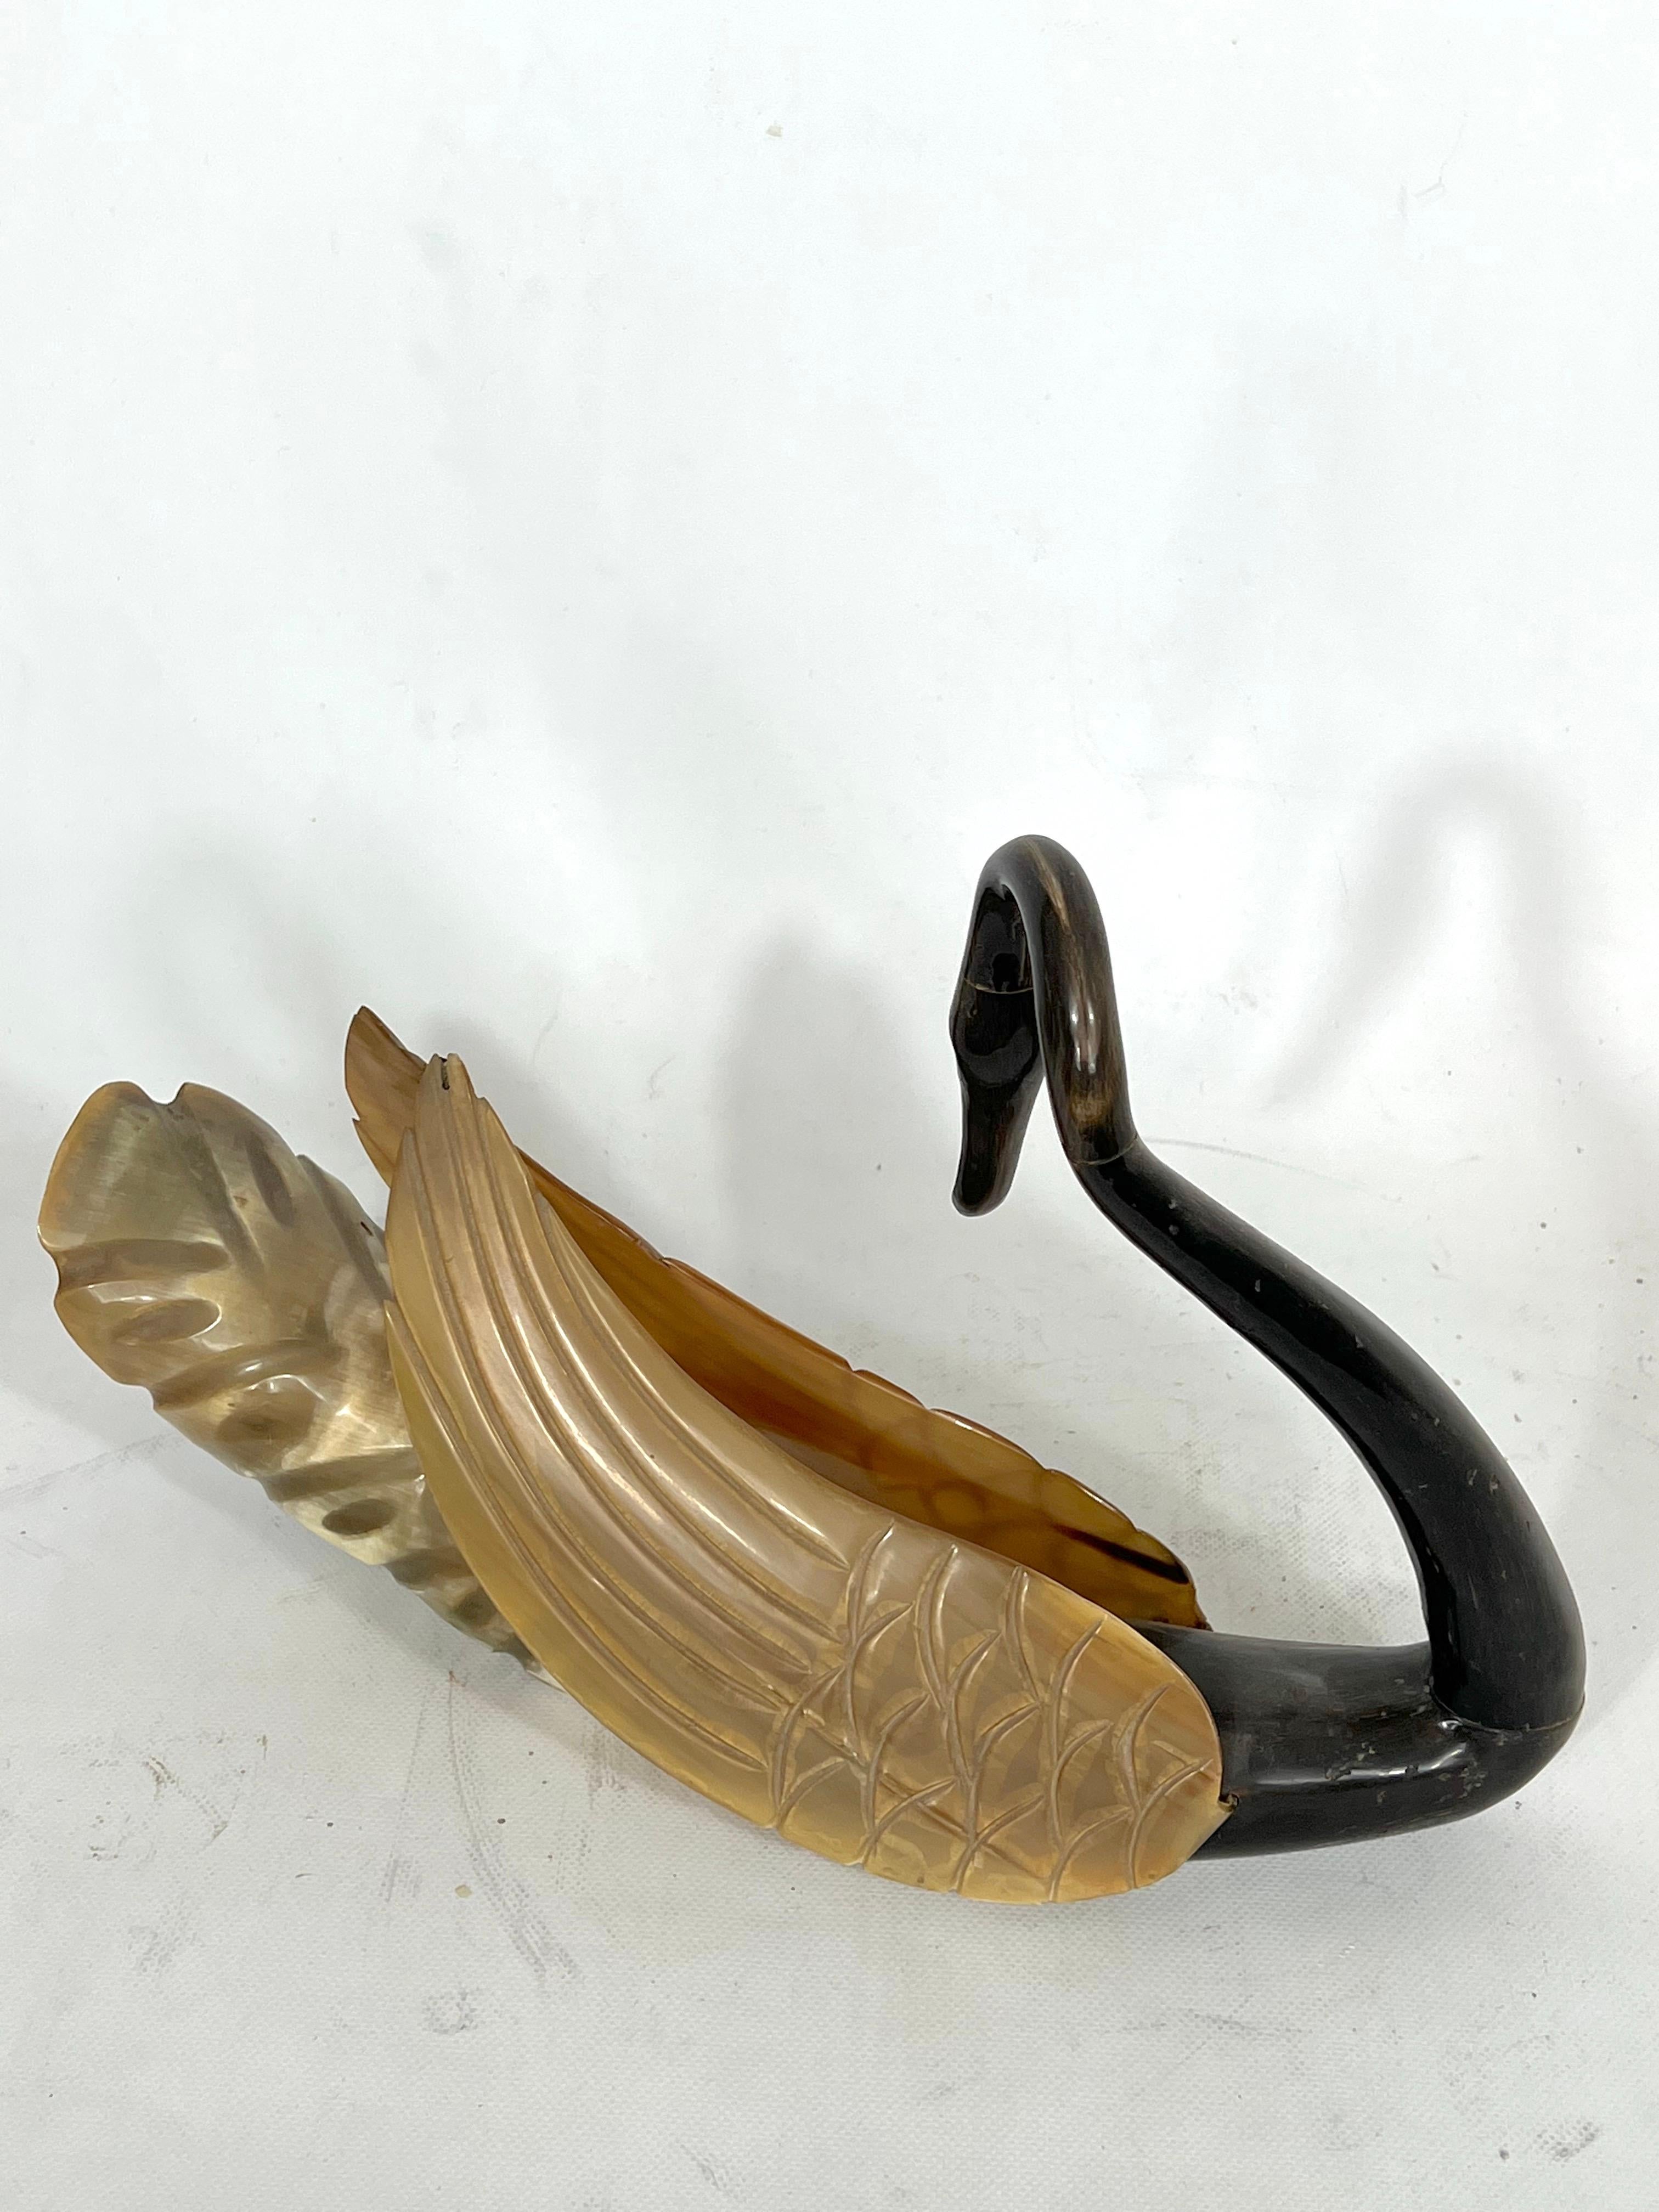 Early 20th Century Rare Vintage Art Nouveau Horn Swan Sculpture from 20s